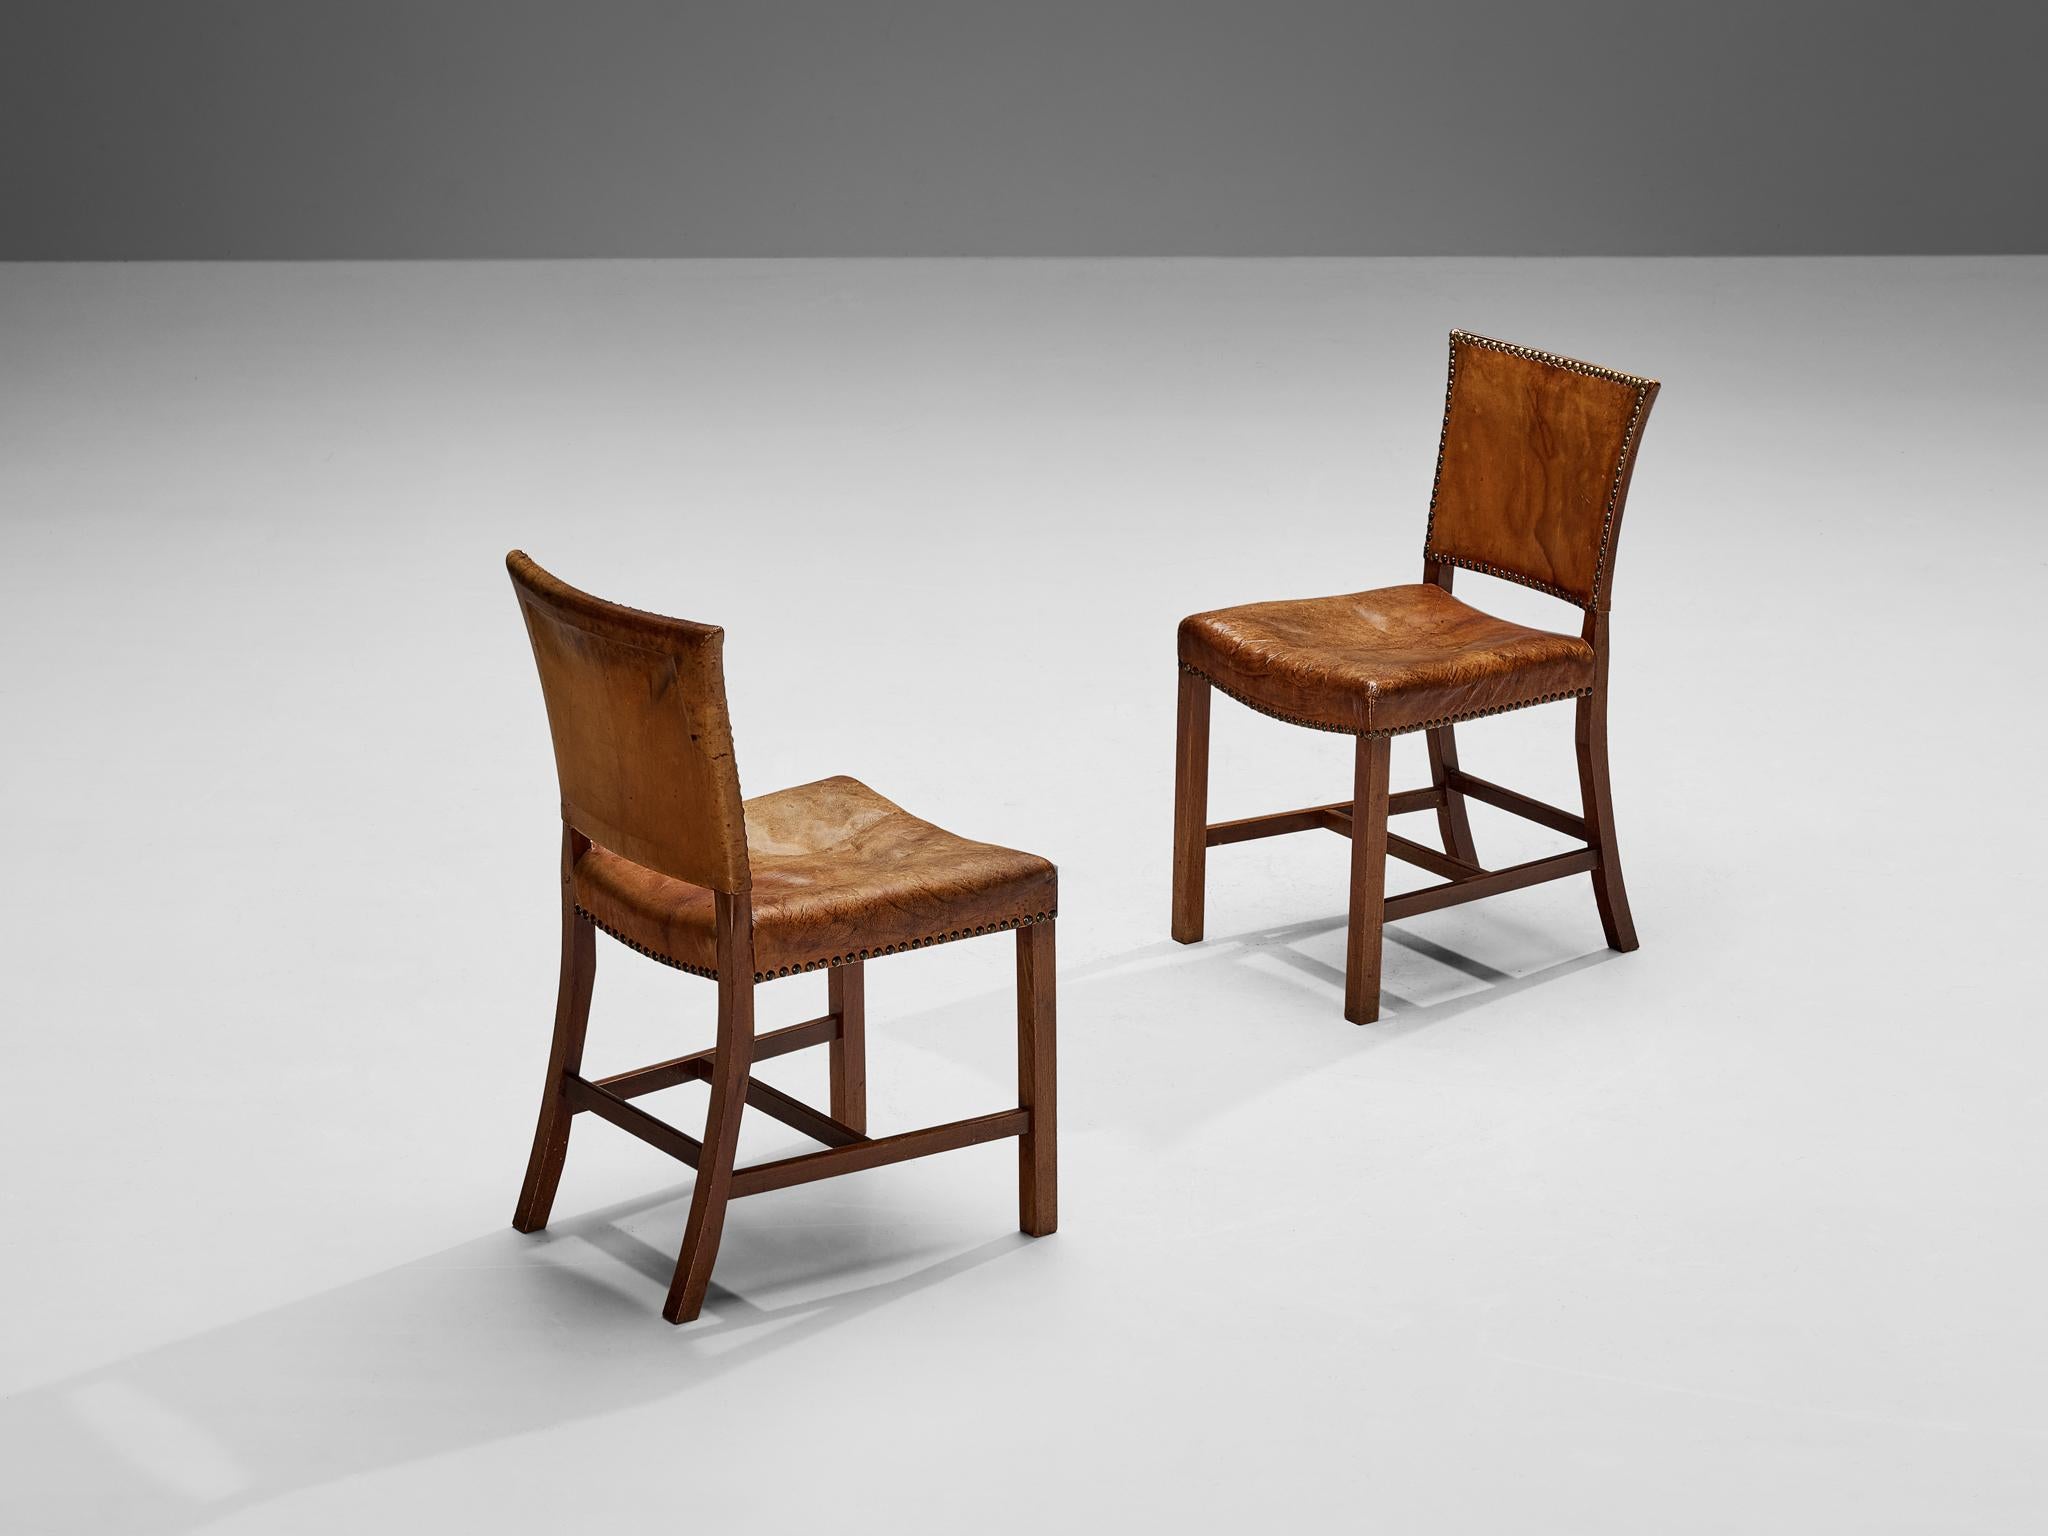 Attributed to Andreas Jeppe Iversen (A.J. Iversen), dining chairs, Niger leather, mahogany, brass, Denmark, 1925/1935

An elegant piece of furniture crafted between 1925 and 1935, reflecting the design principles that were prevalent during that